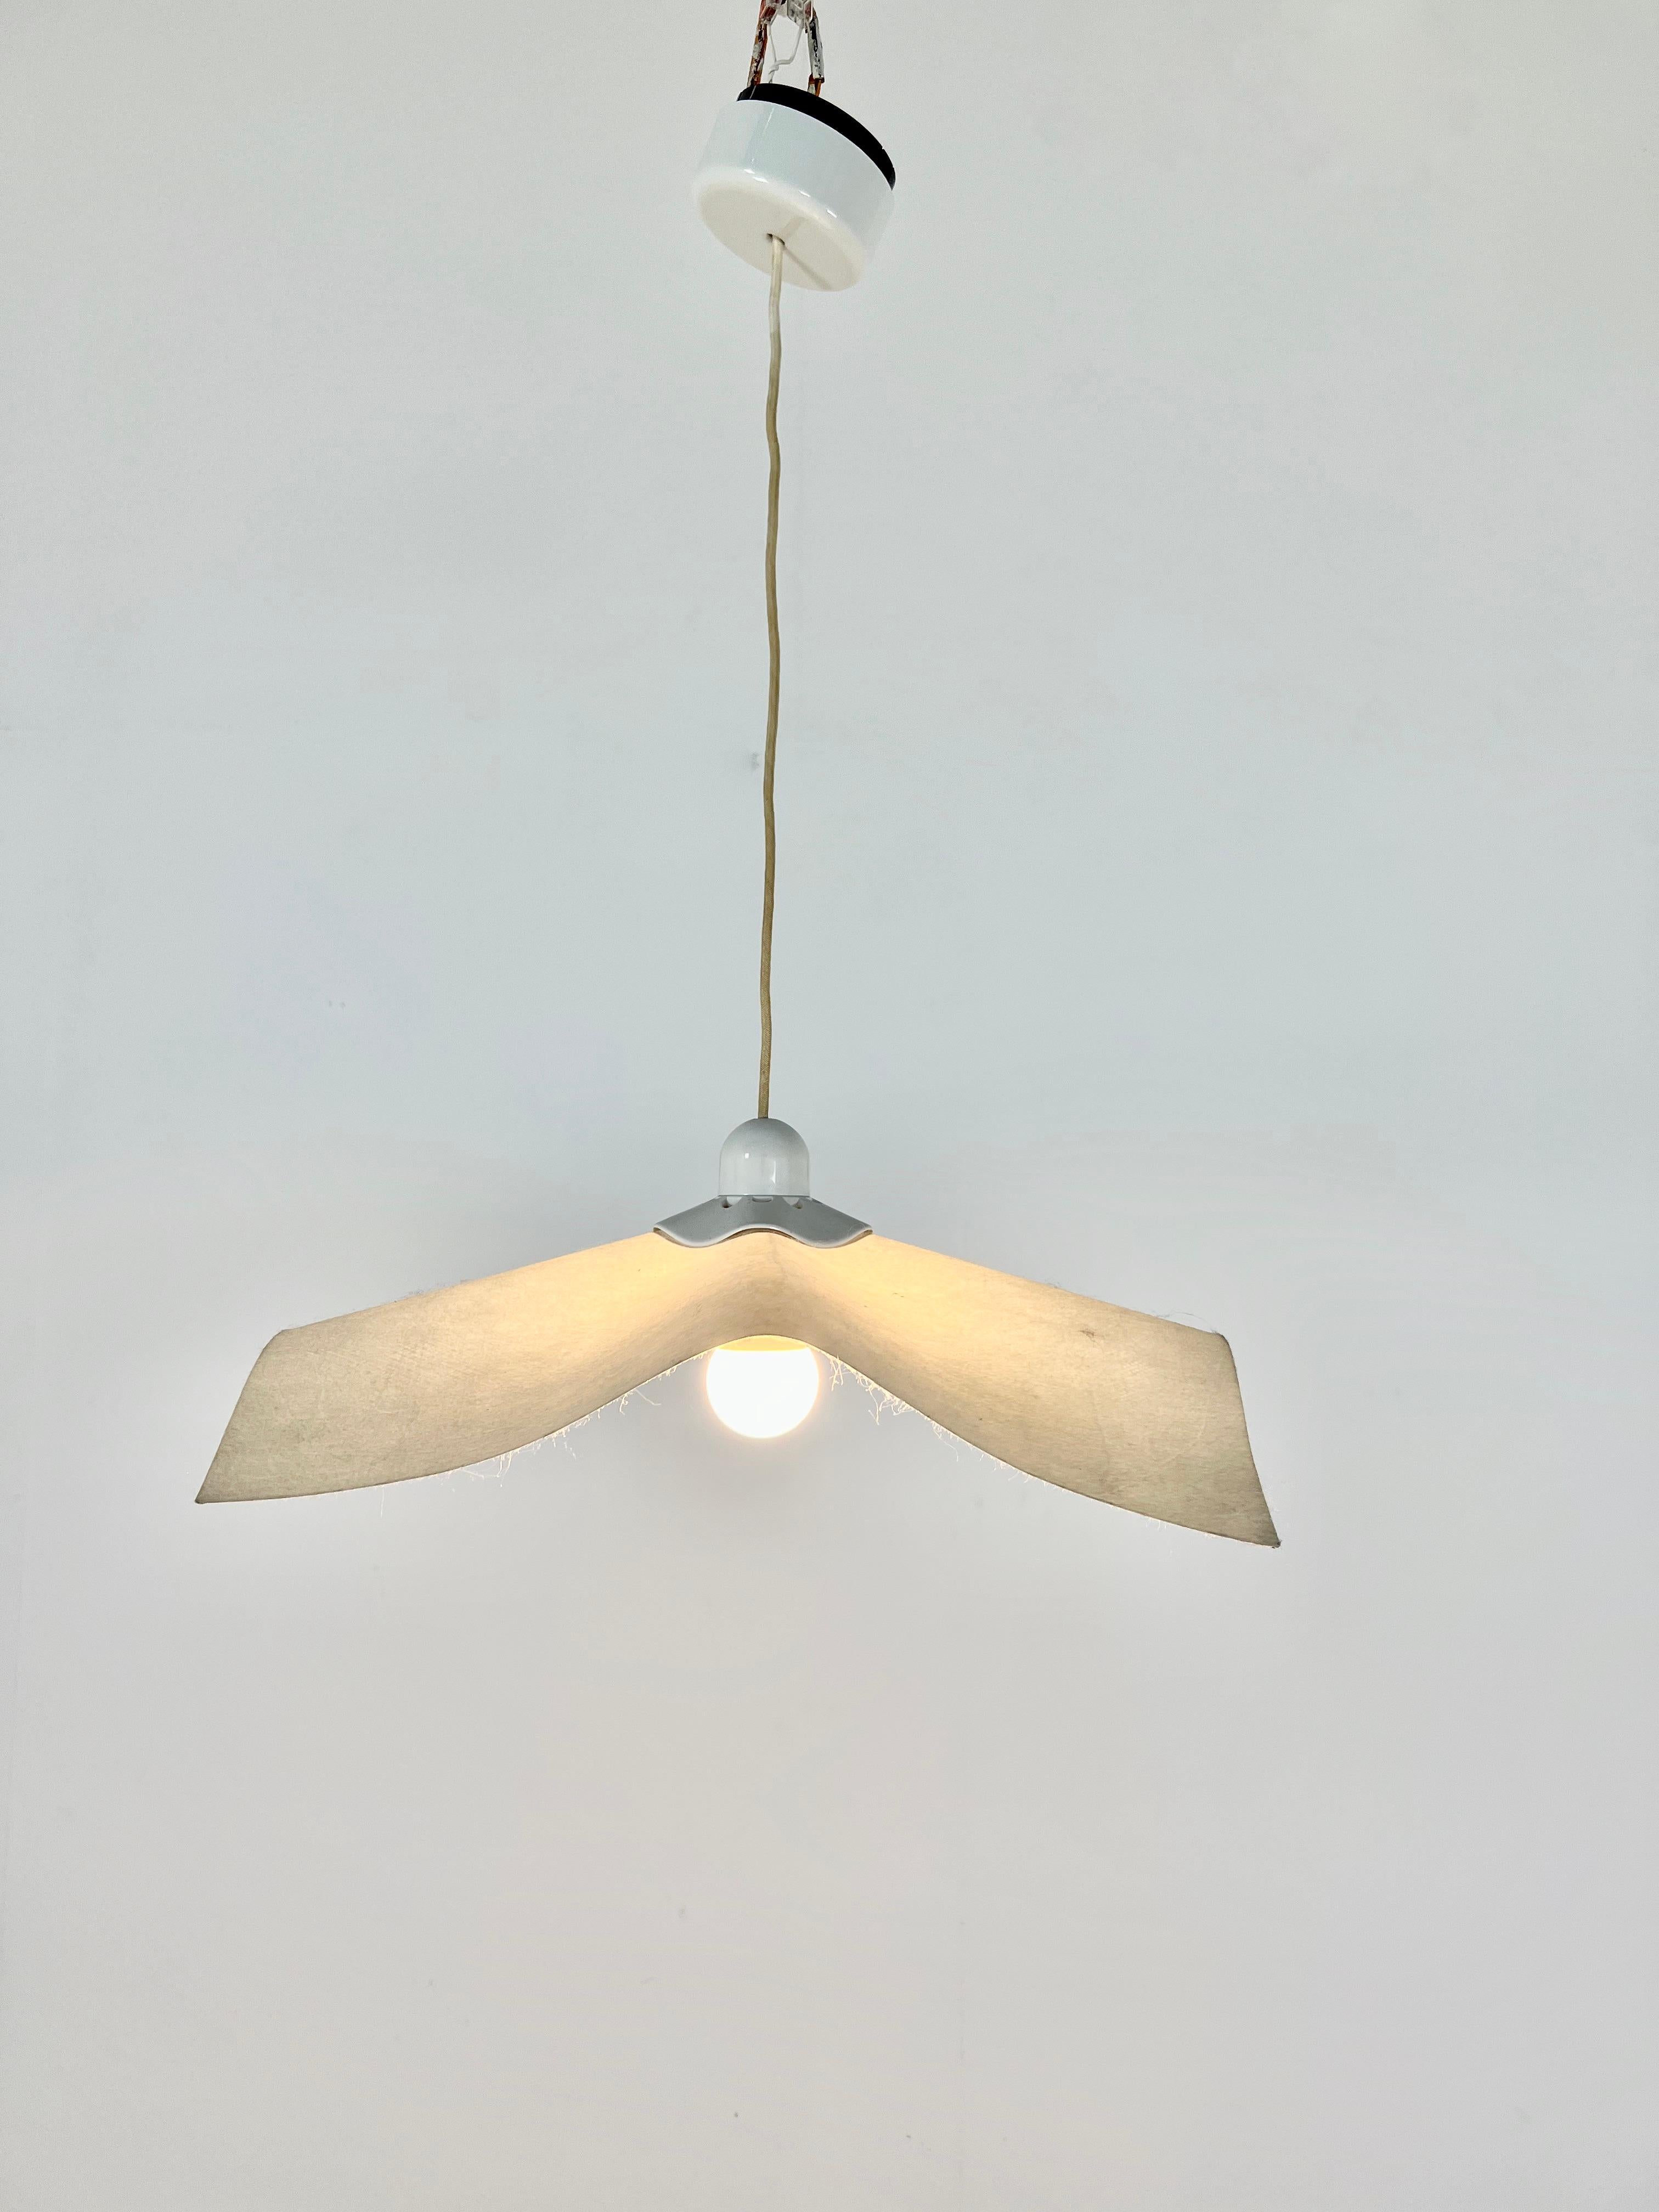 Paper chandelier. Wear due to time and age of the chandelier.